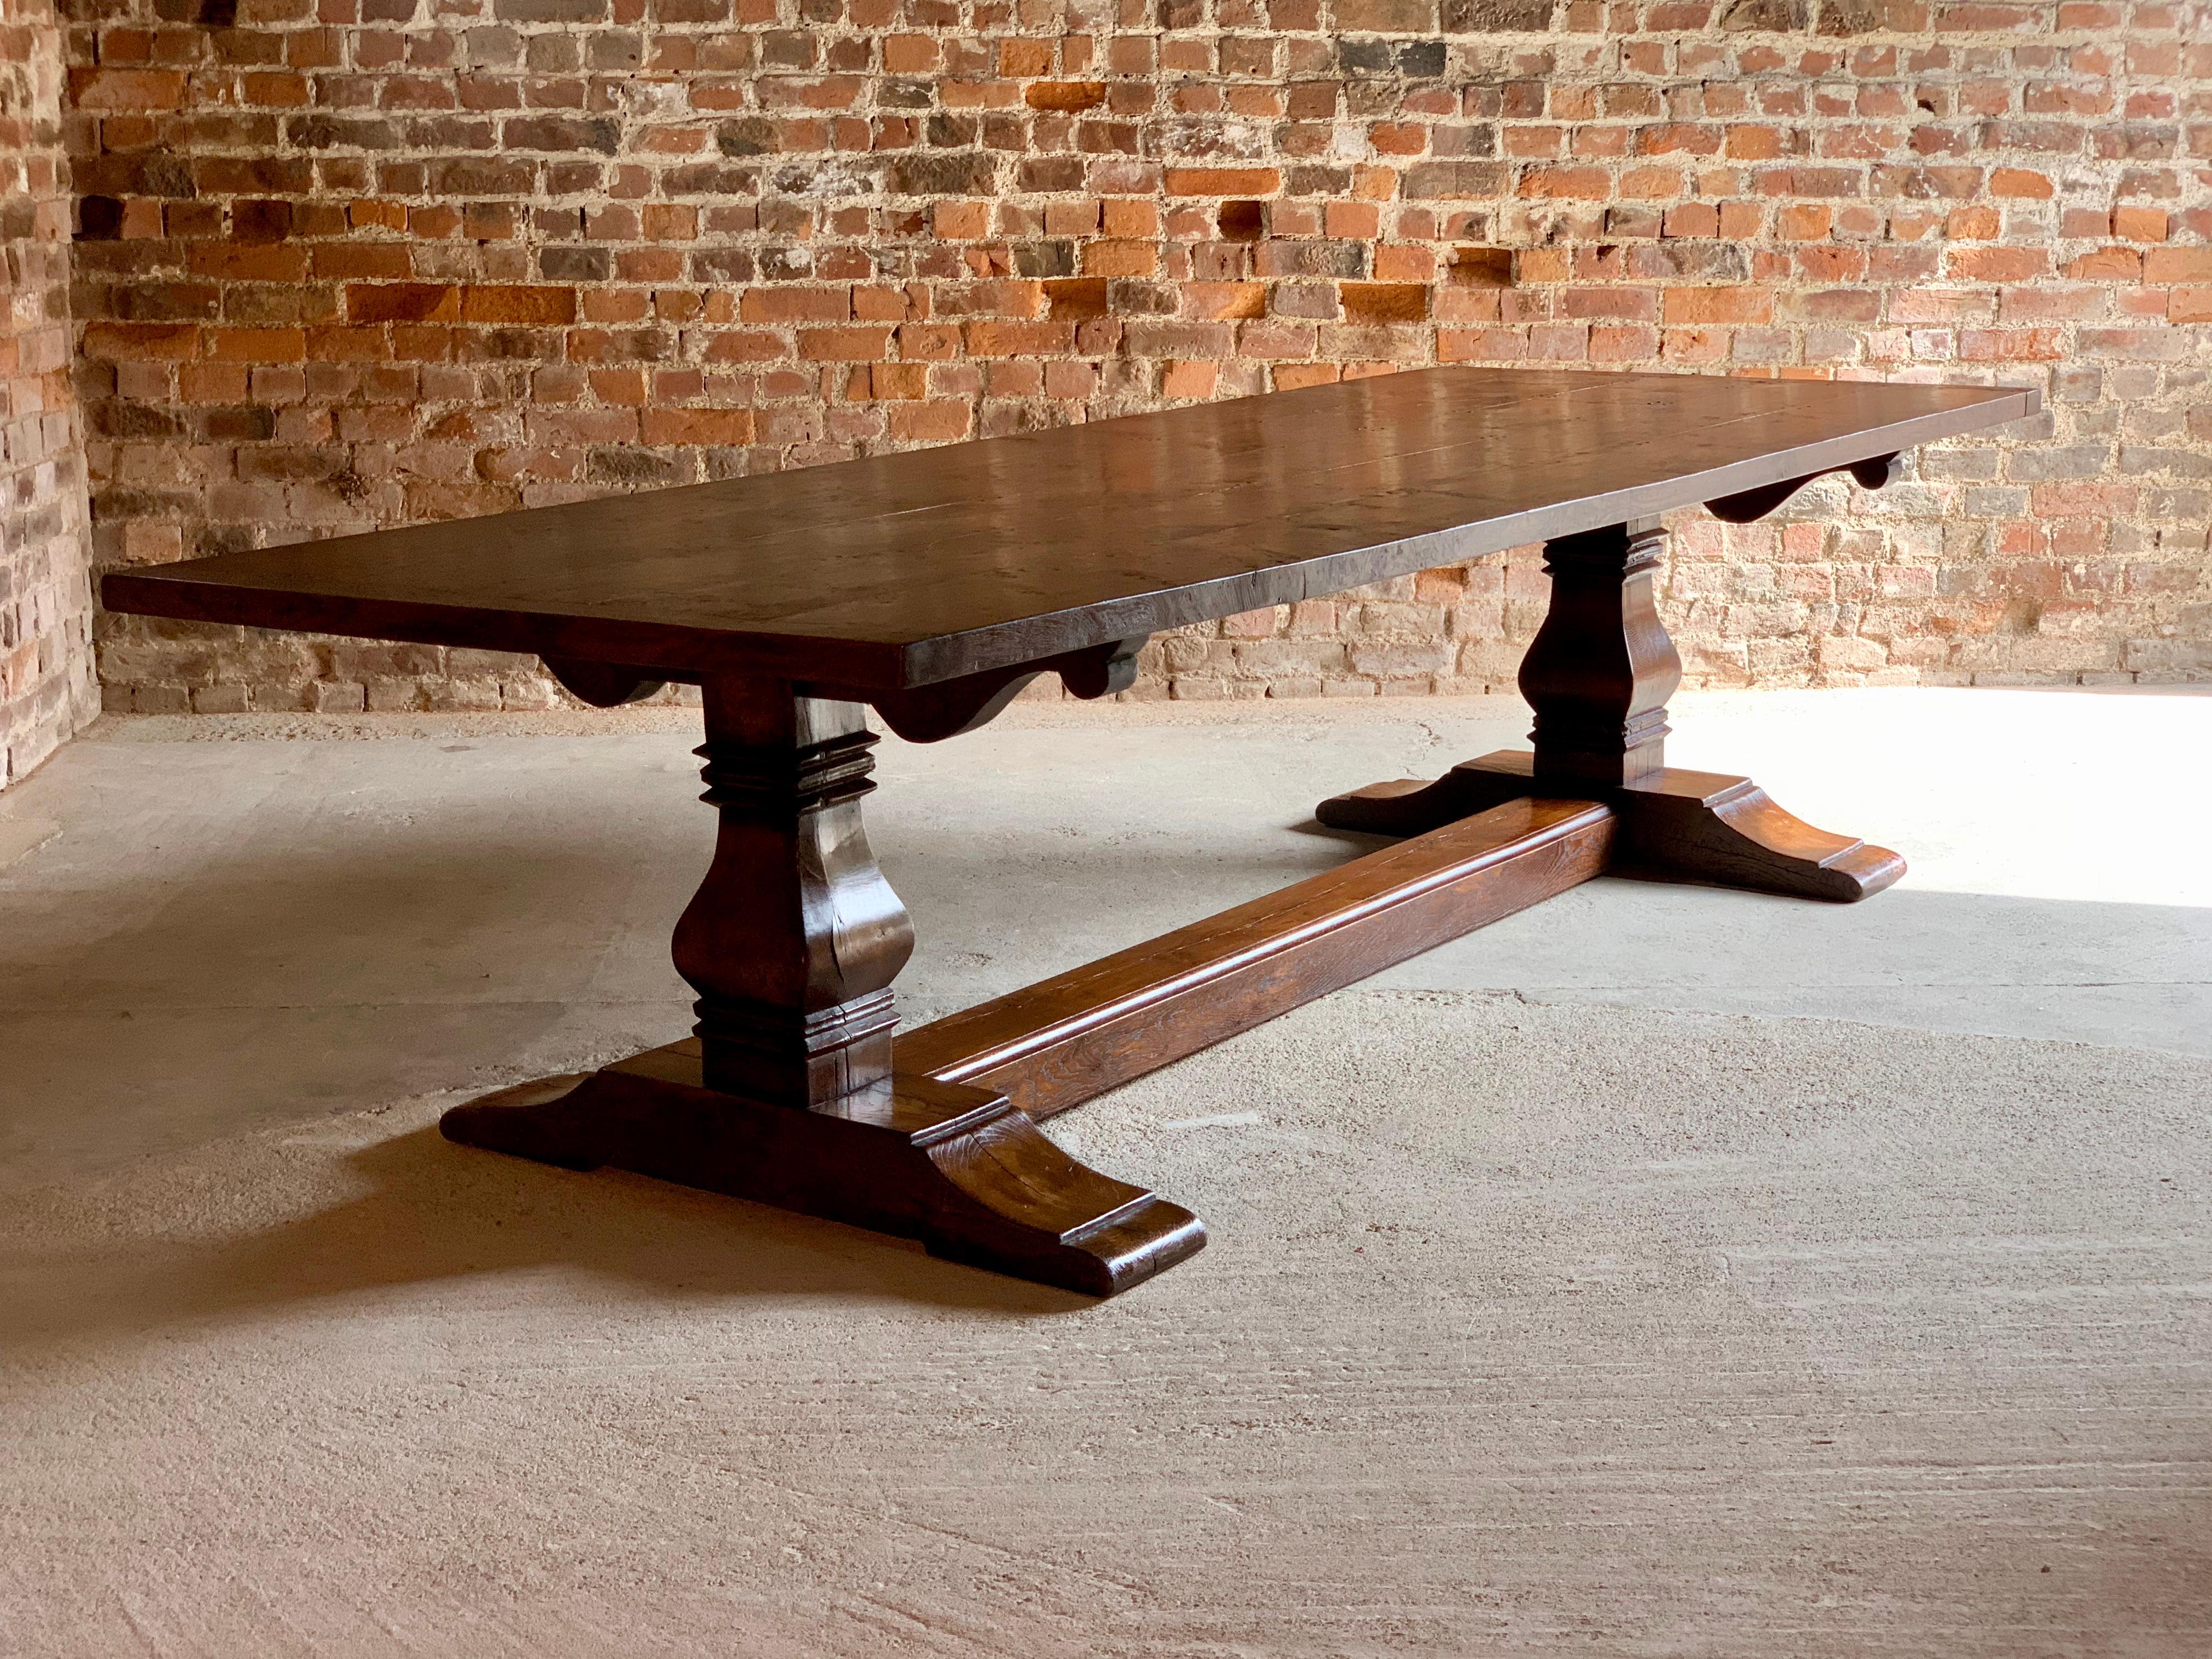 A magnificent top quality antique Bylaws 17th century style solid oak refectory dining table of large proportions seating 10 people comfortably, the solid rectangular planked top rests on a twin bulbous baluster base joined by a single full length